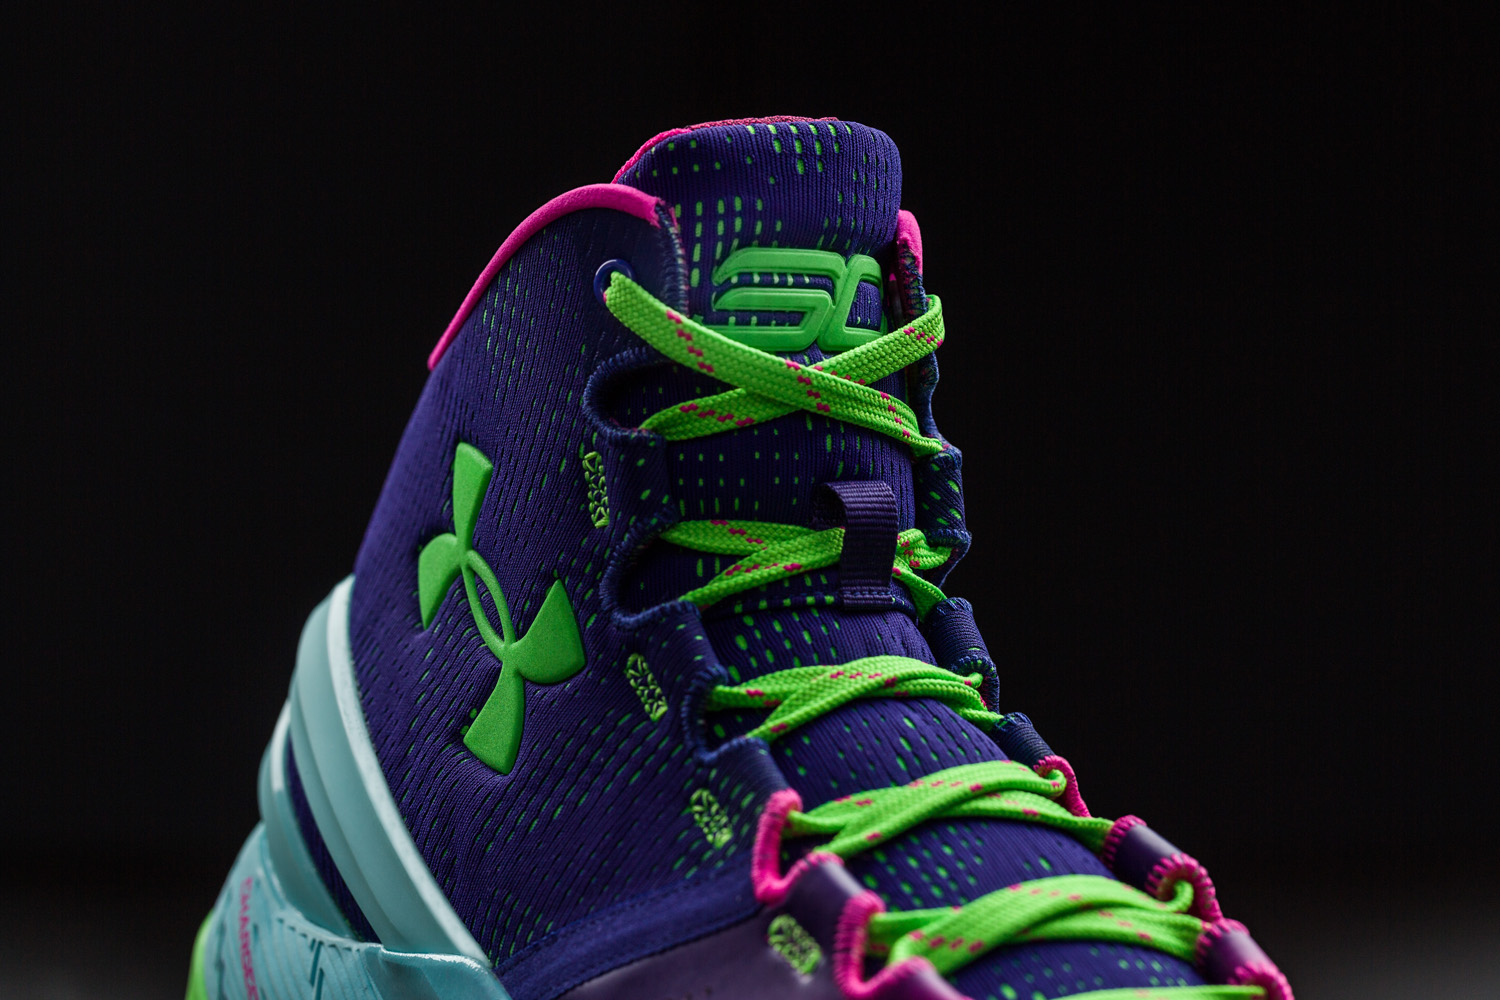 curry 2 northern lights for sale